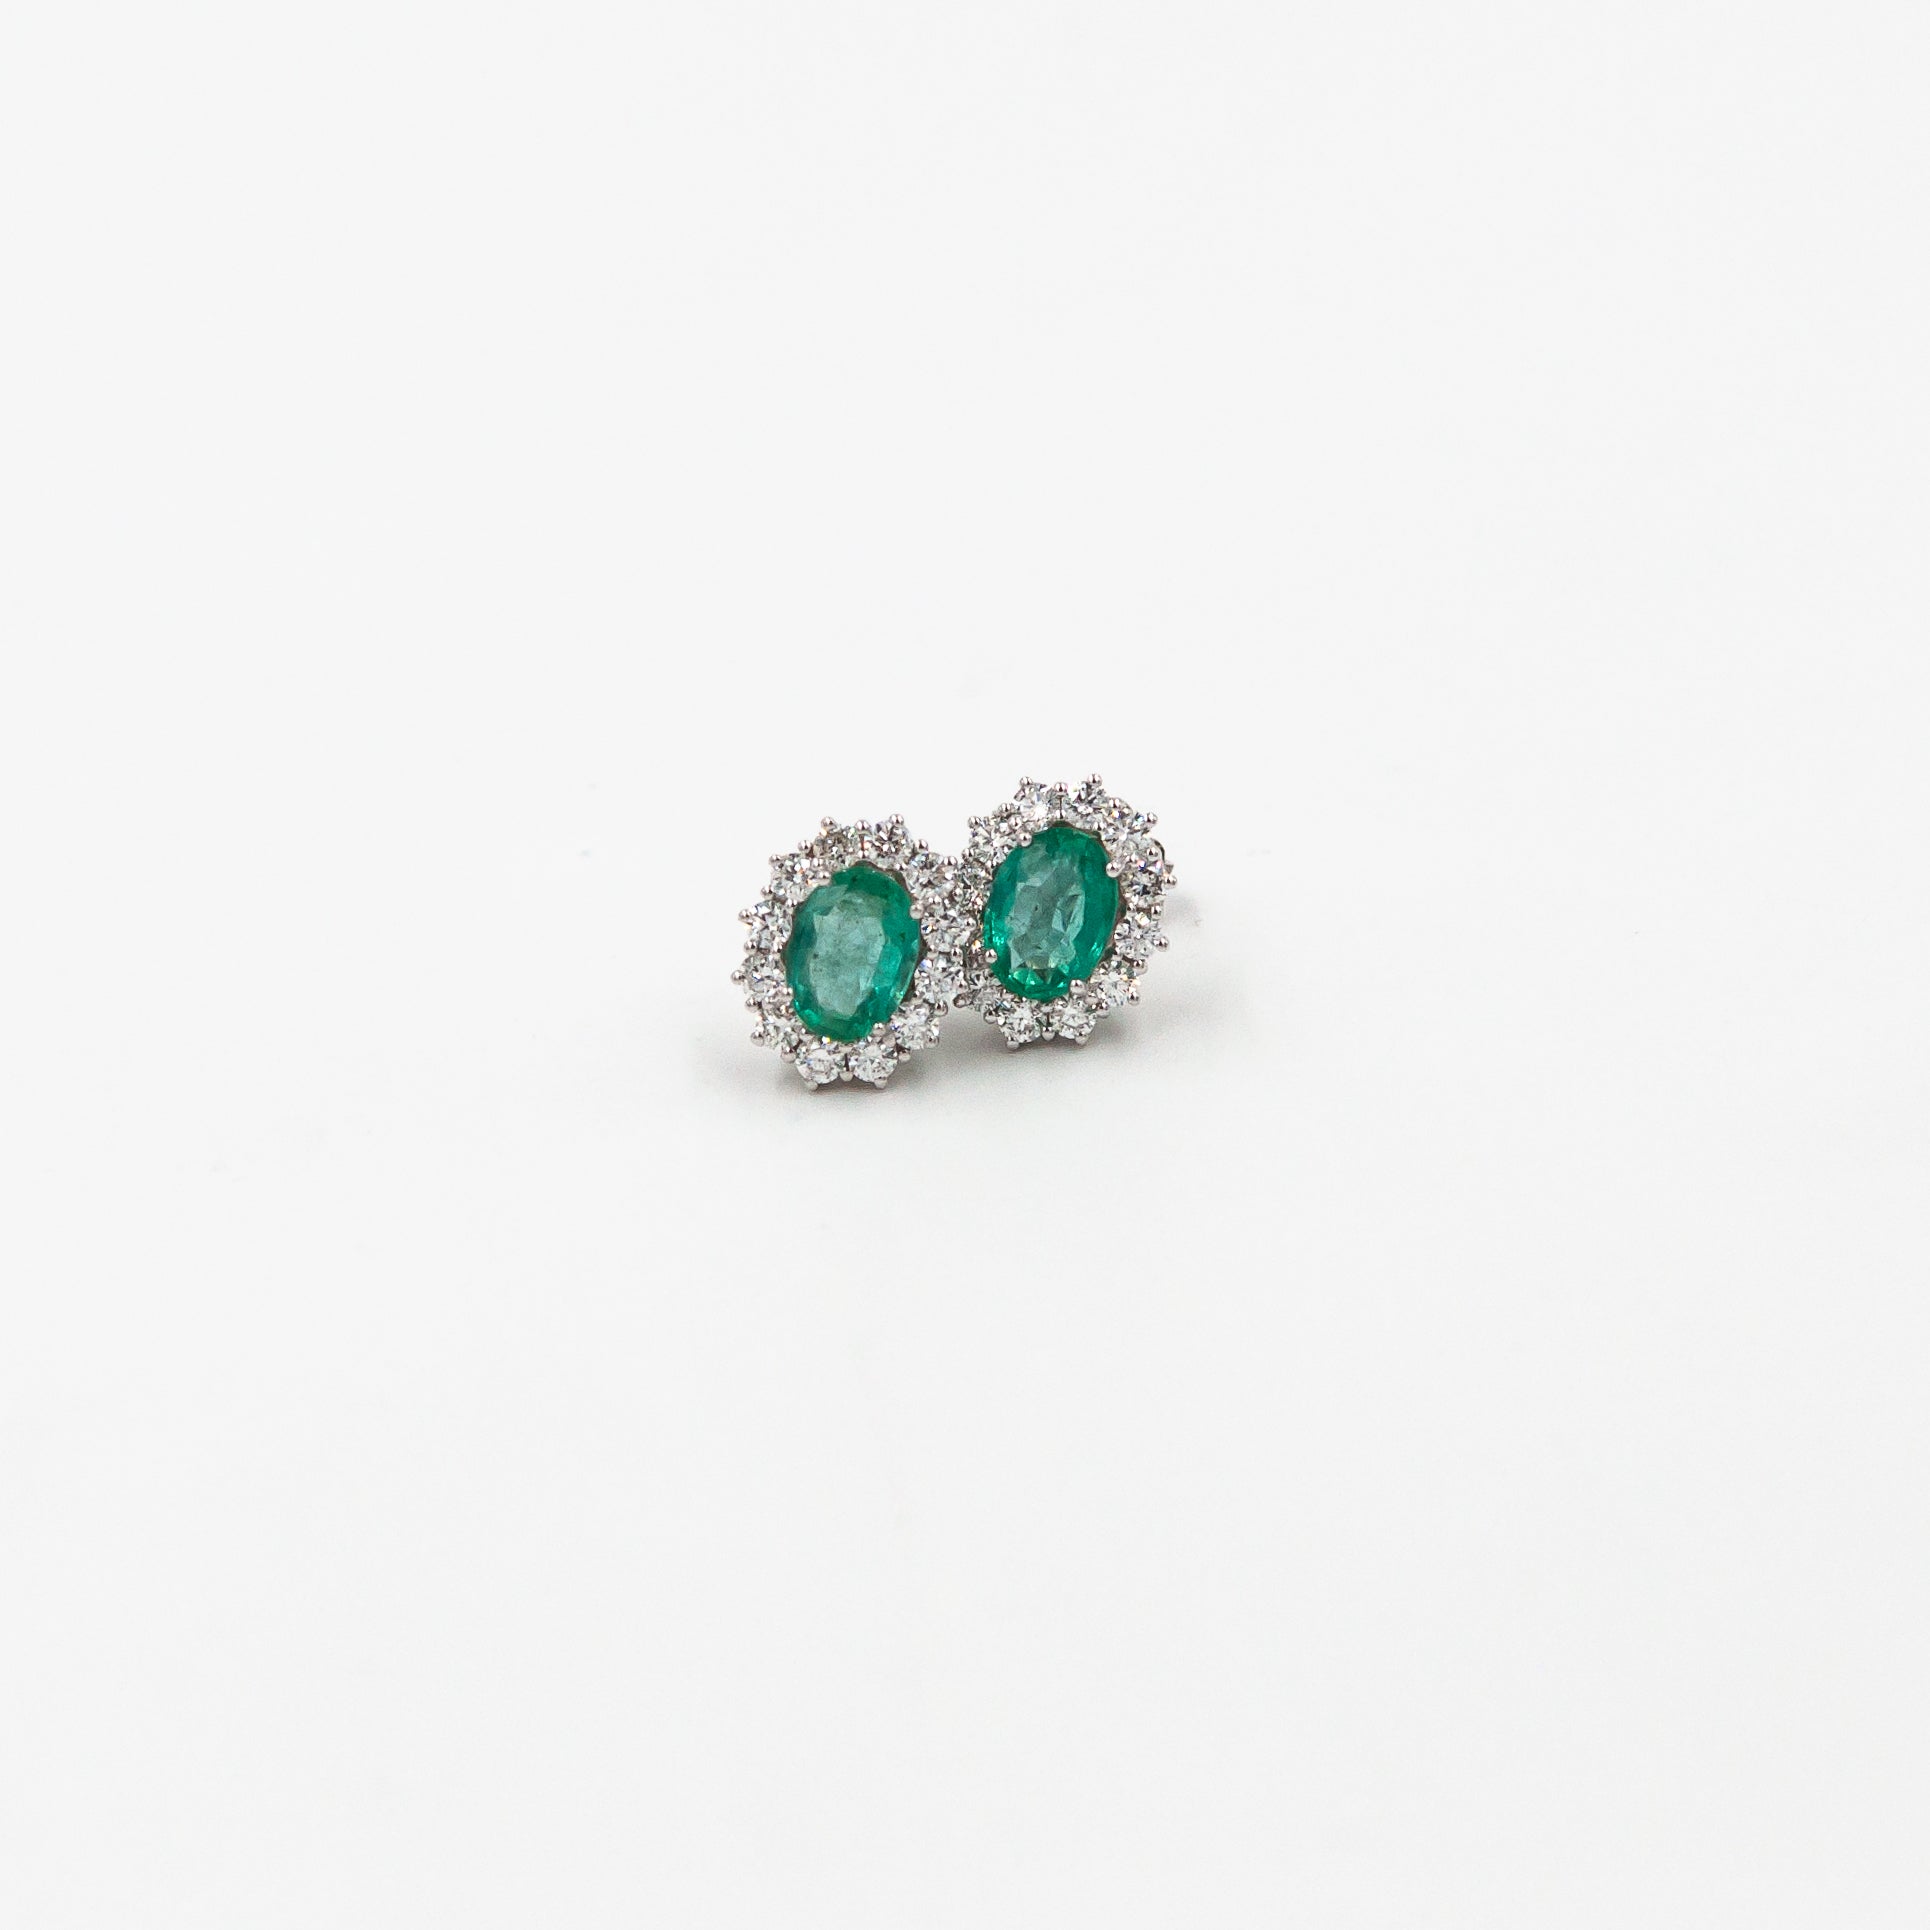 Sparkle earrings with Emeralds and Diamonds